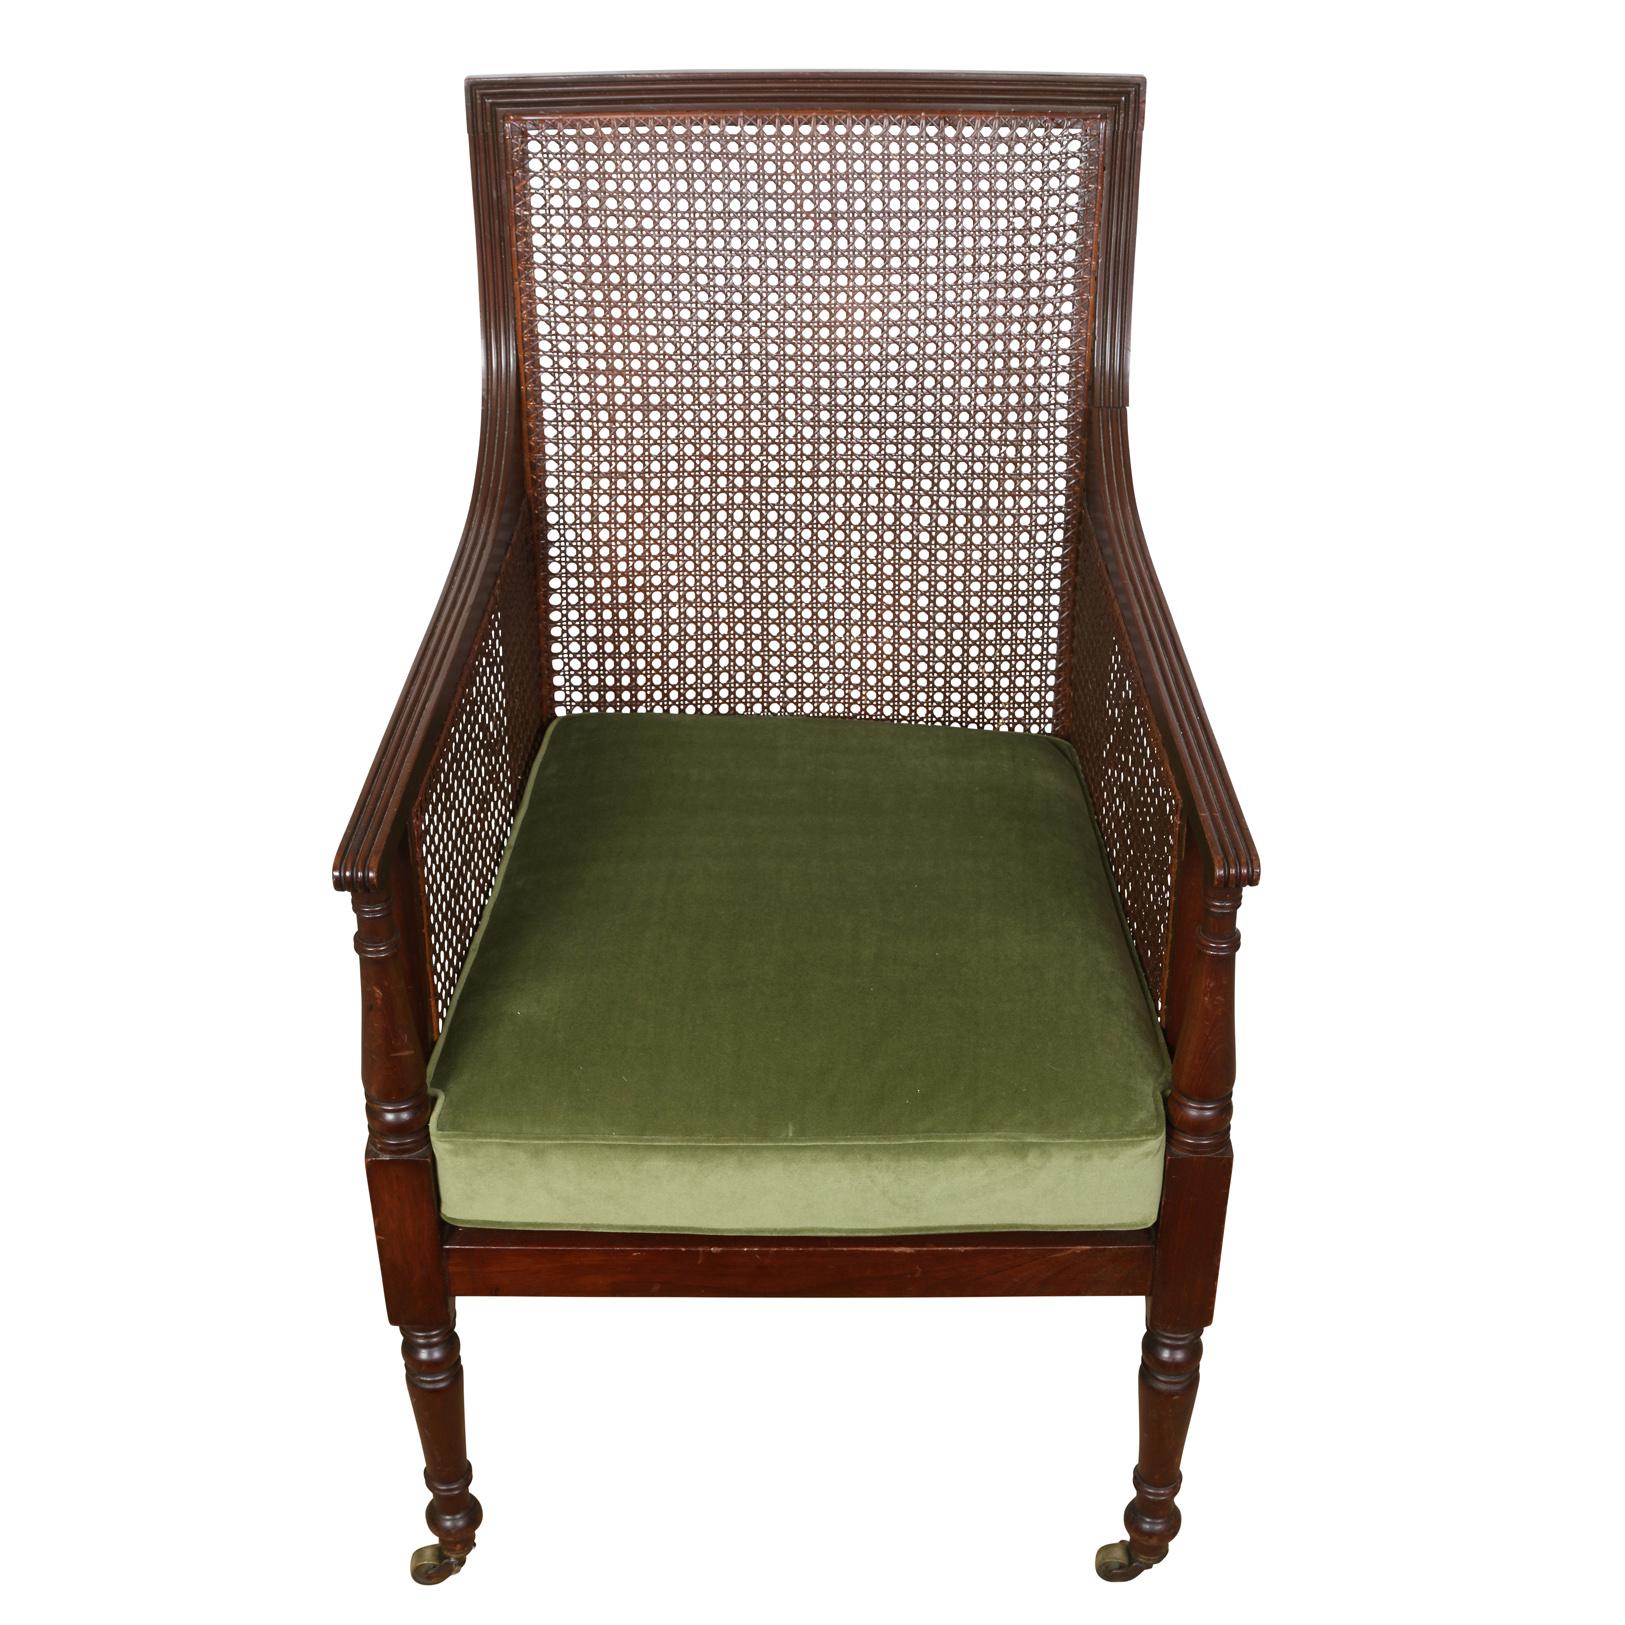 20th Century Regency Style Caned Library Chair With Green Velvet Seat For Sale